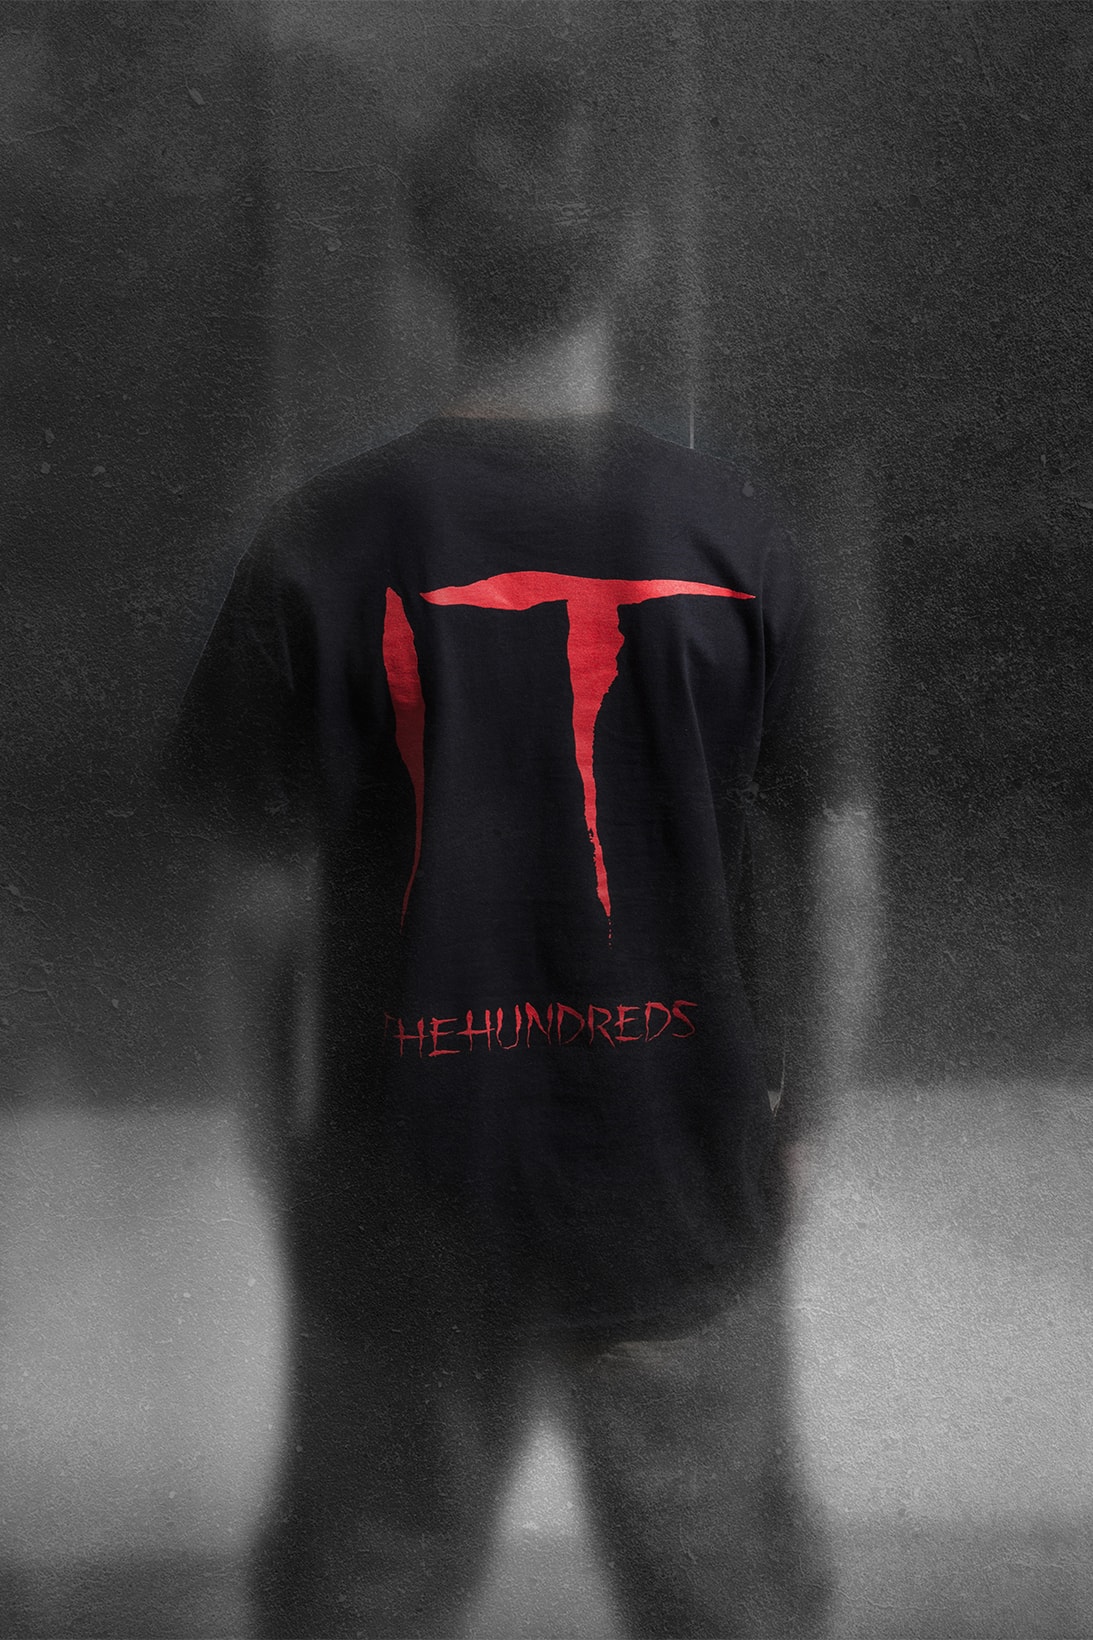 IT The Hundreds Capsule Collection Pennywise Stephen King 2017 December 14 Release Date Info Collaboration Pennywise Clown